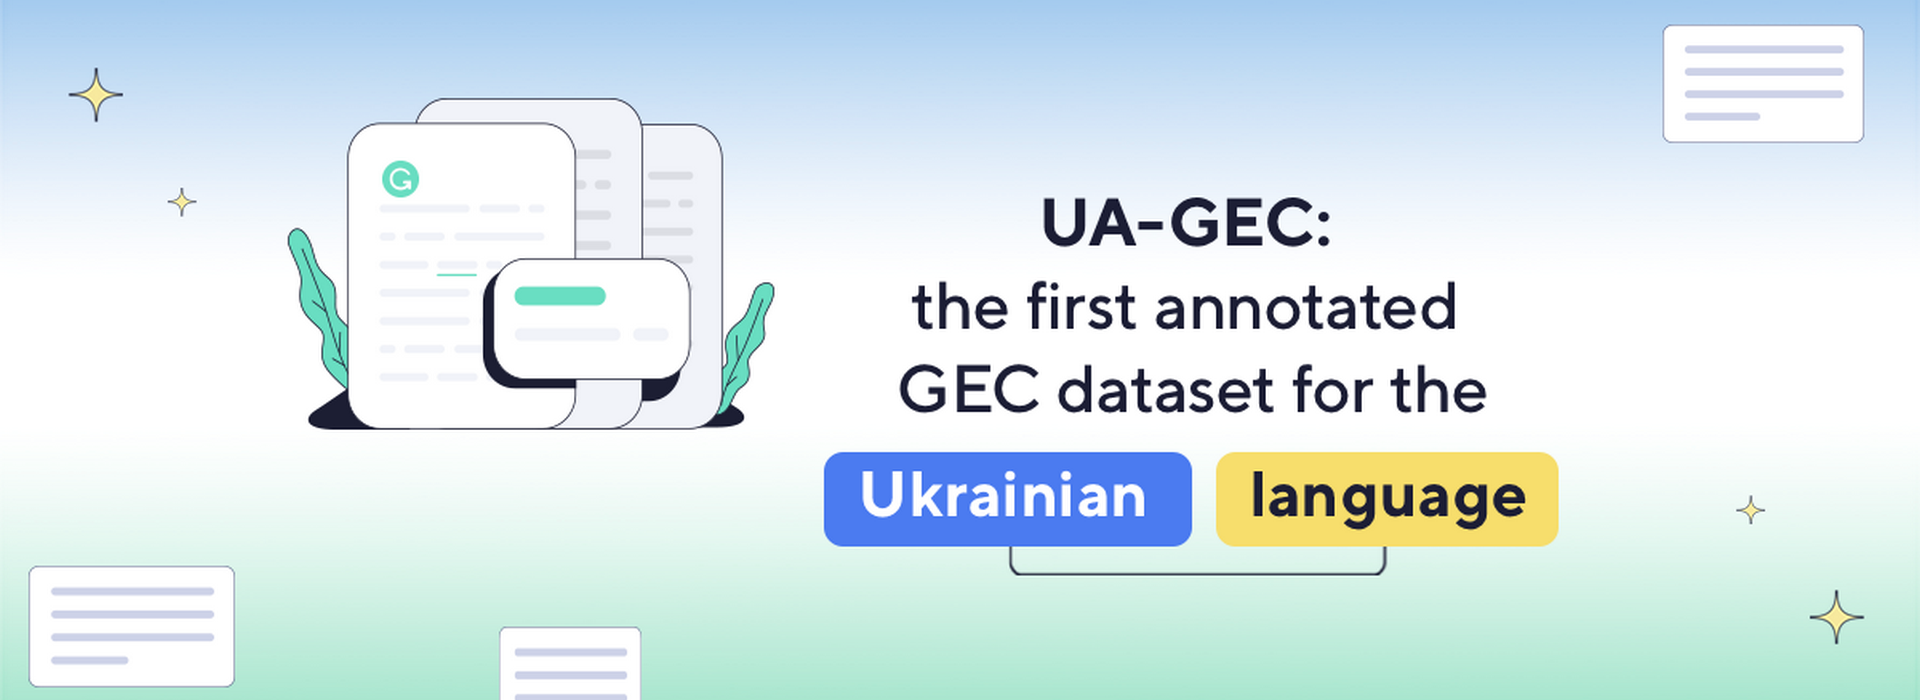 Grammarly Is Gathering Texts in Ukrainian to Create the First Annotated GEC Dataset for the Ukrainian Language